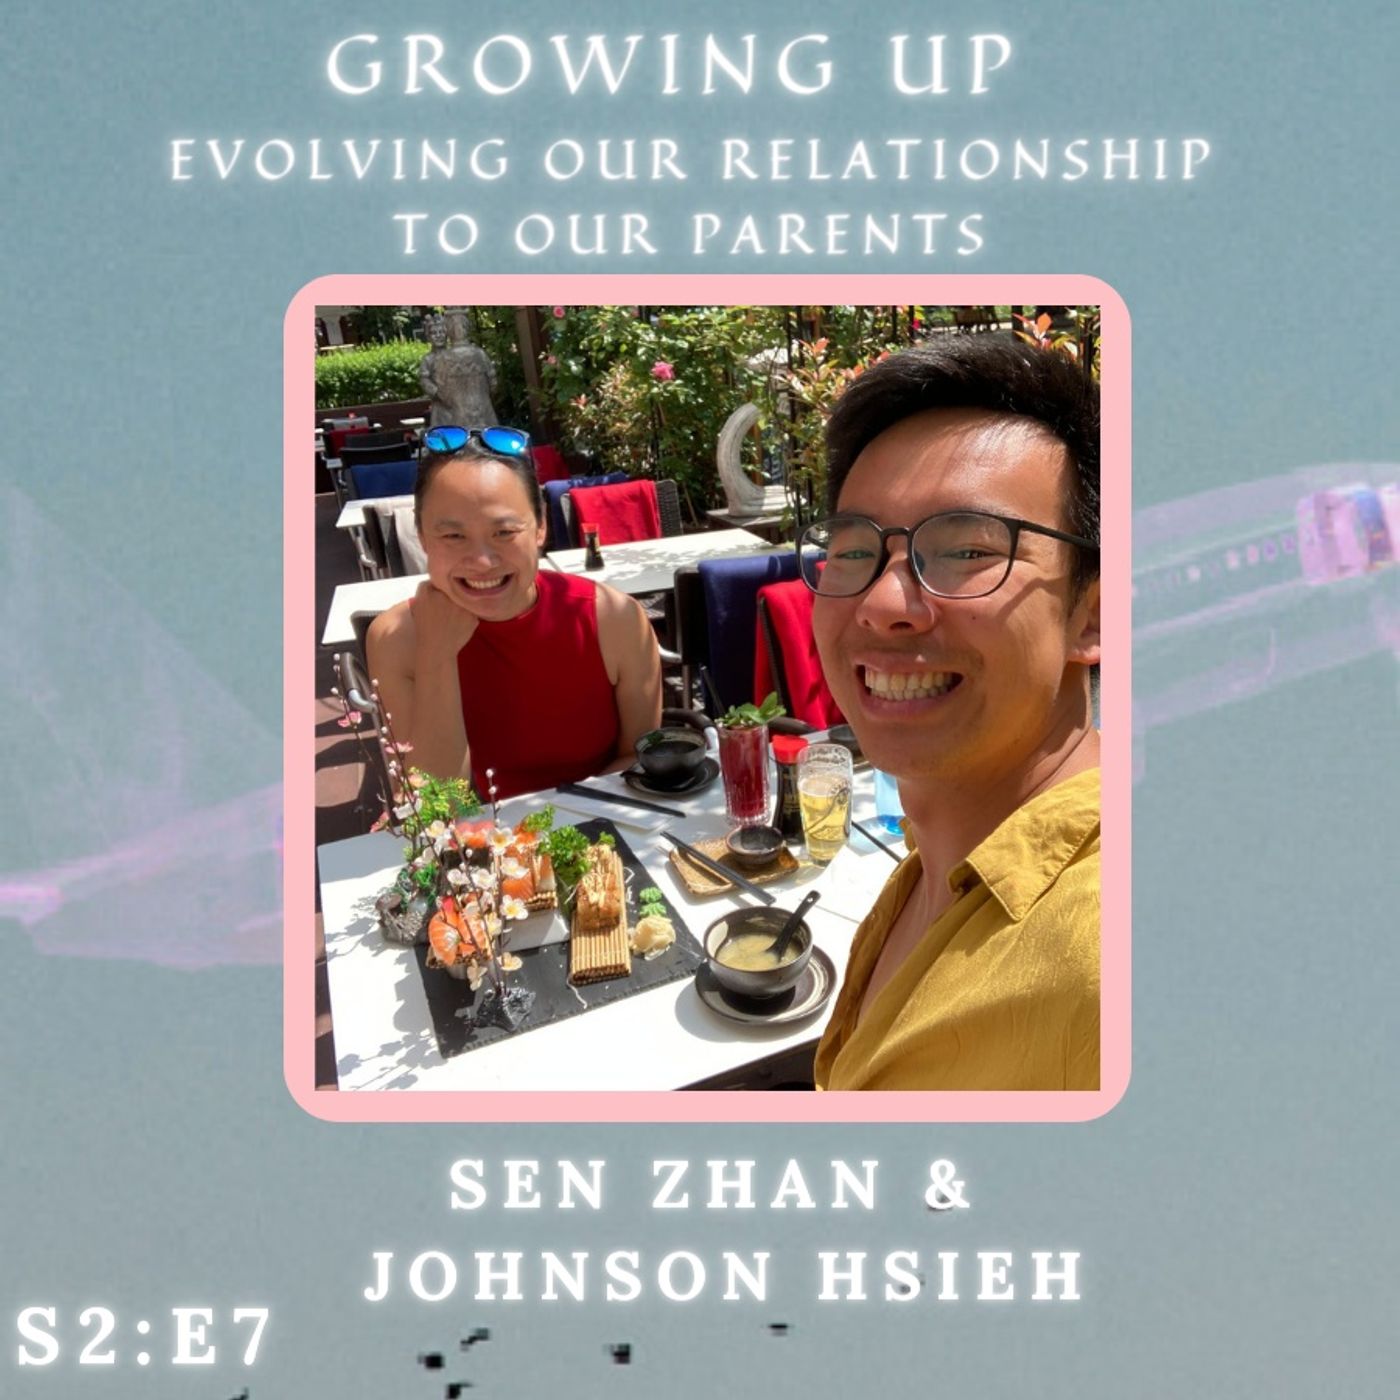 S2 | E7 - Growing Up: Evolving Our Relationship to Our Parents, with Johnson Hsieh (1 of 2)